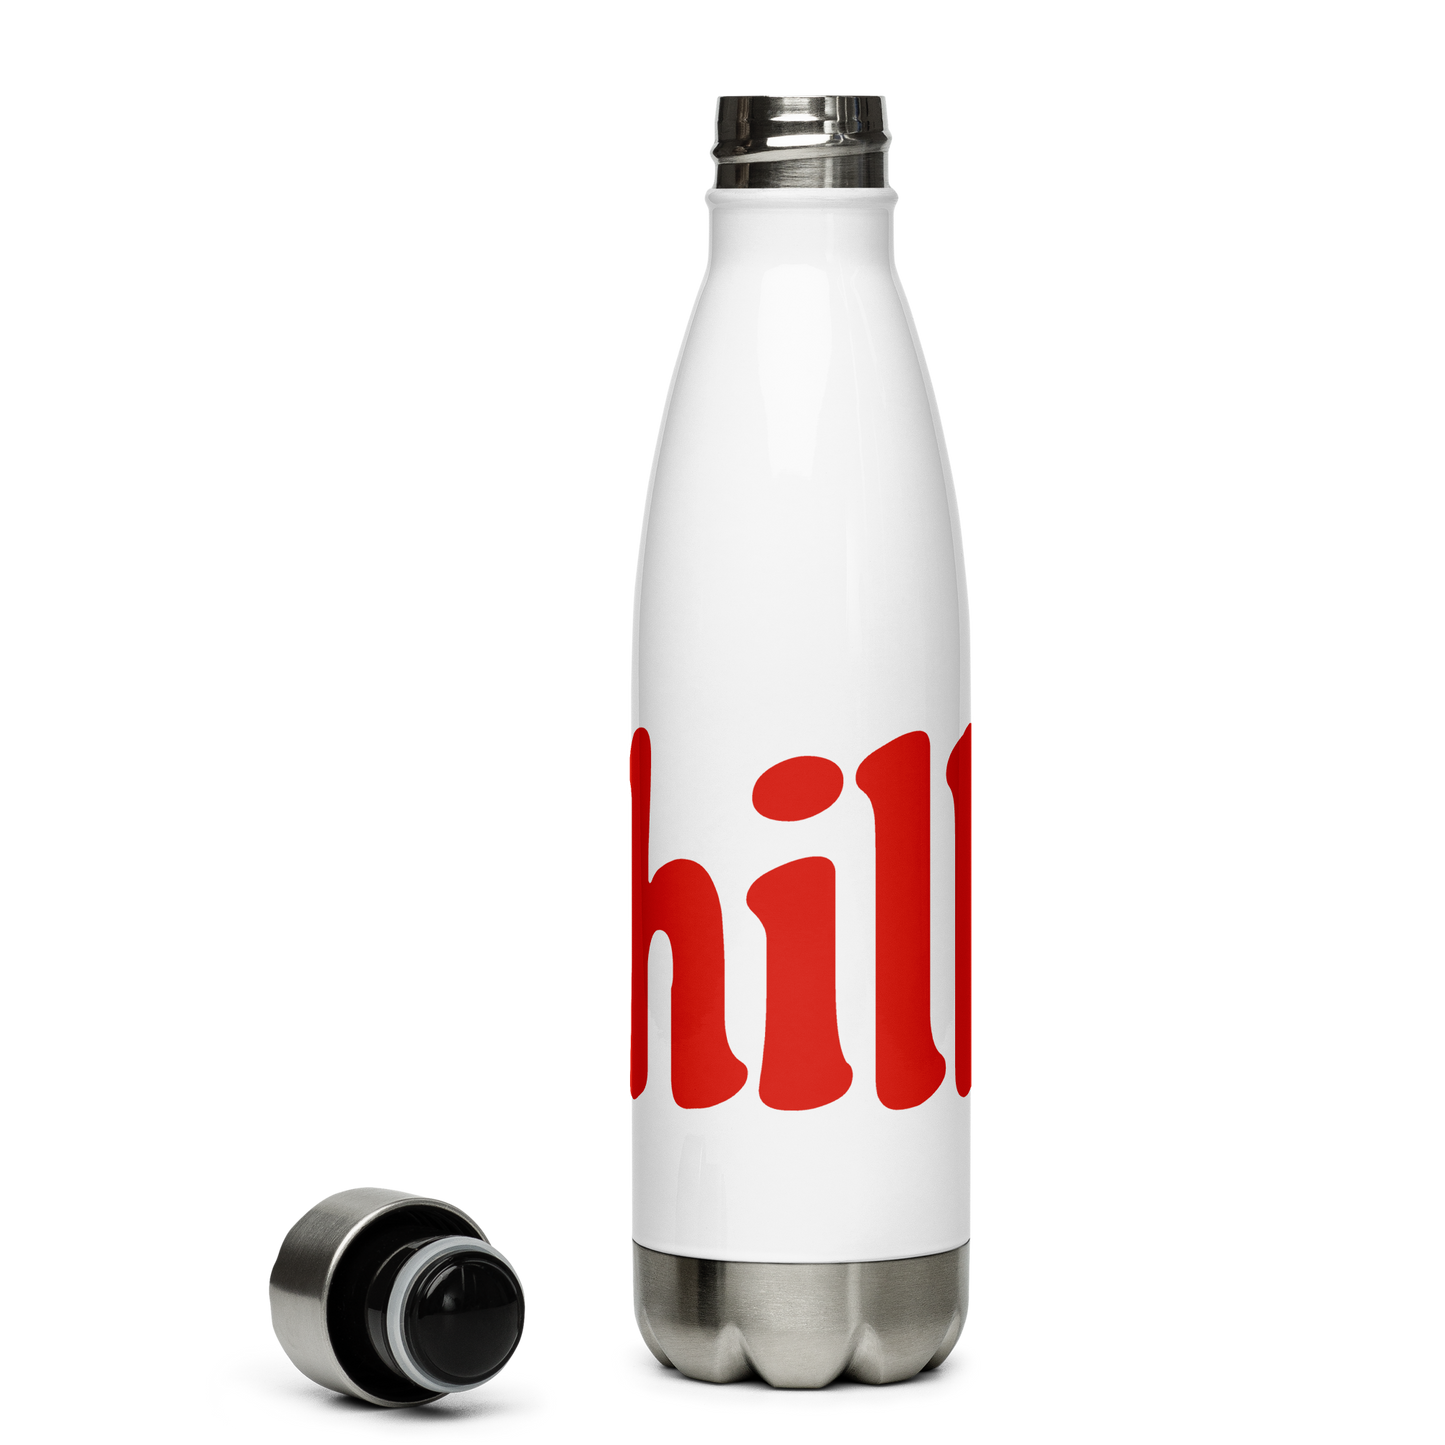 Bhilly 33 Stainless Steel Water Bottle 17oz | Printed Graphics